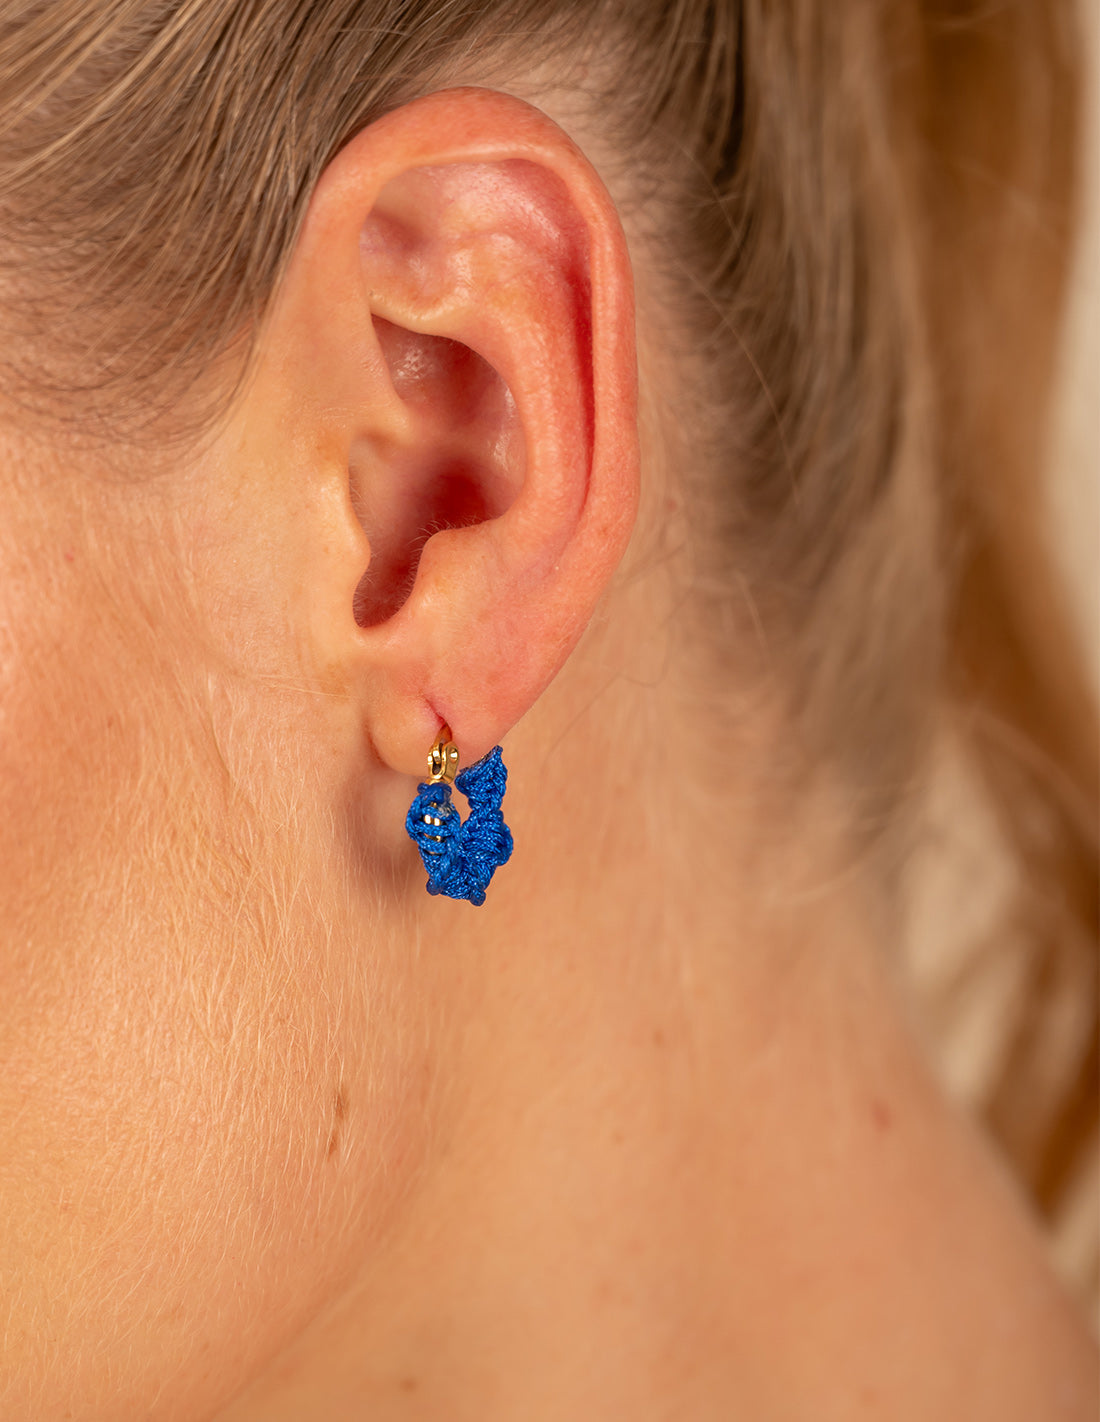 Melody Earring Blue King. Hand-Dyed Earring With Hand Woven Macramé In Blue King. Entreaguas